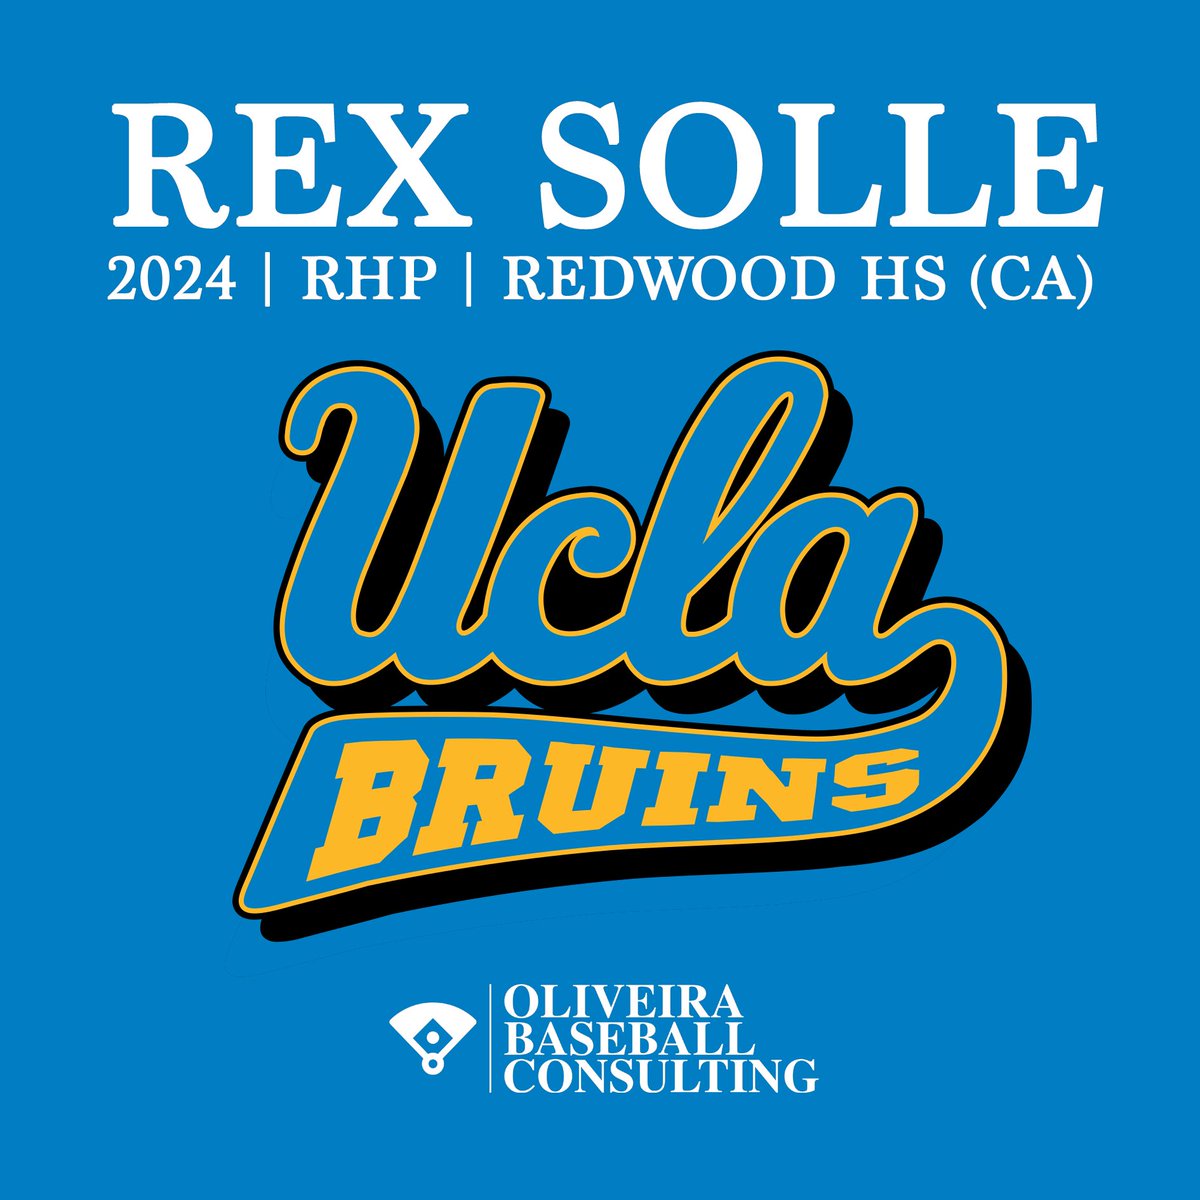 Congrats to Rex Solle on his commitment to the University of California, Los Angeles. The Bruins with a big arm coming to Westwood. So excited for him and his family #UCLA #GoBruins #8Clap #Big10 #Committed #OBC https://t.co/H7PisPACsR